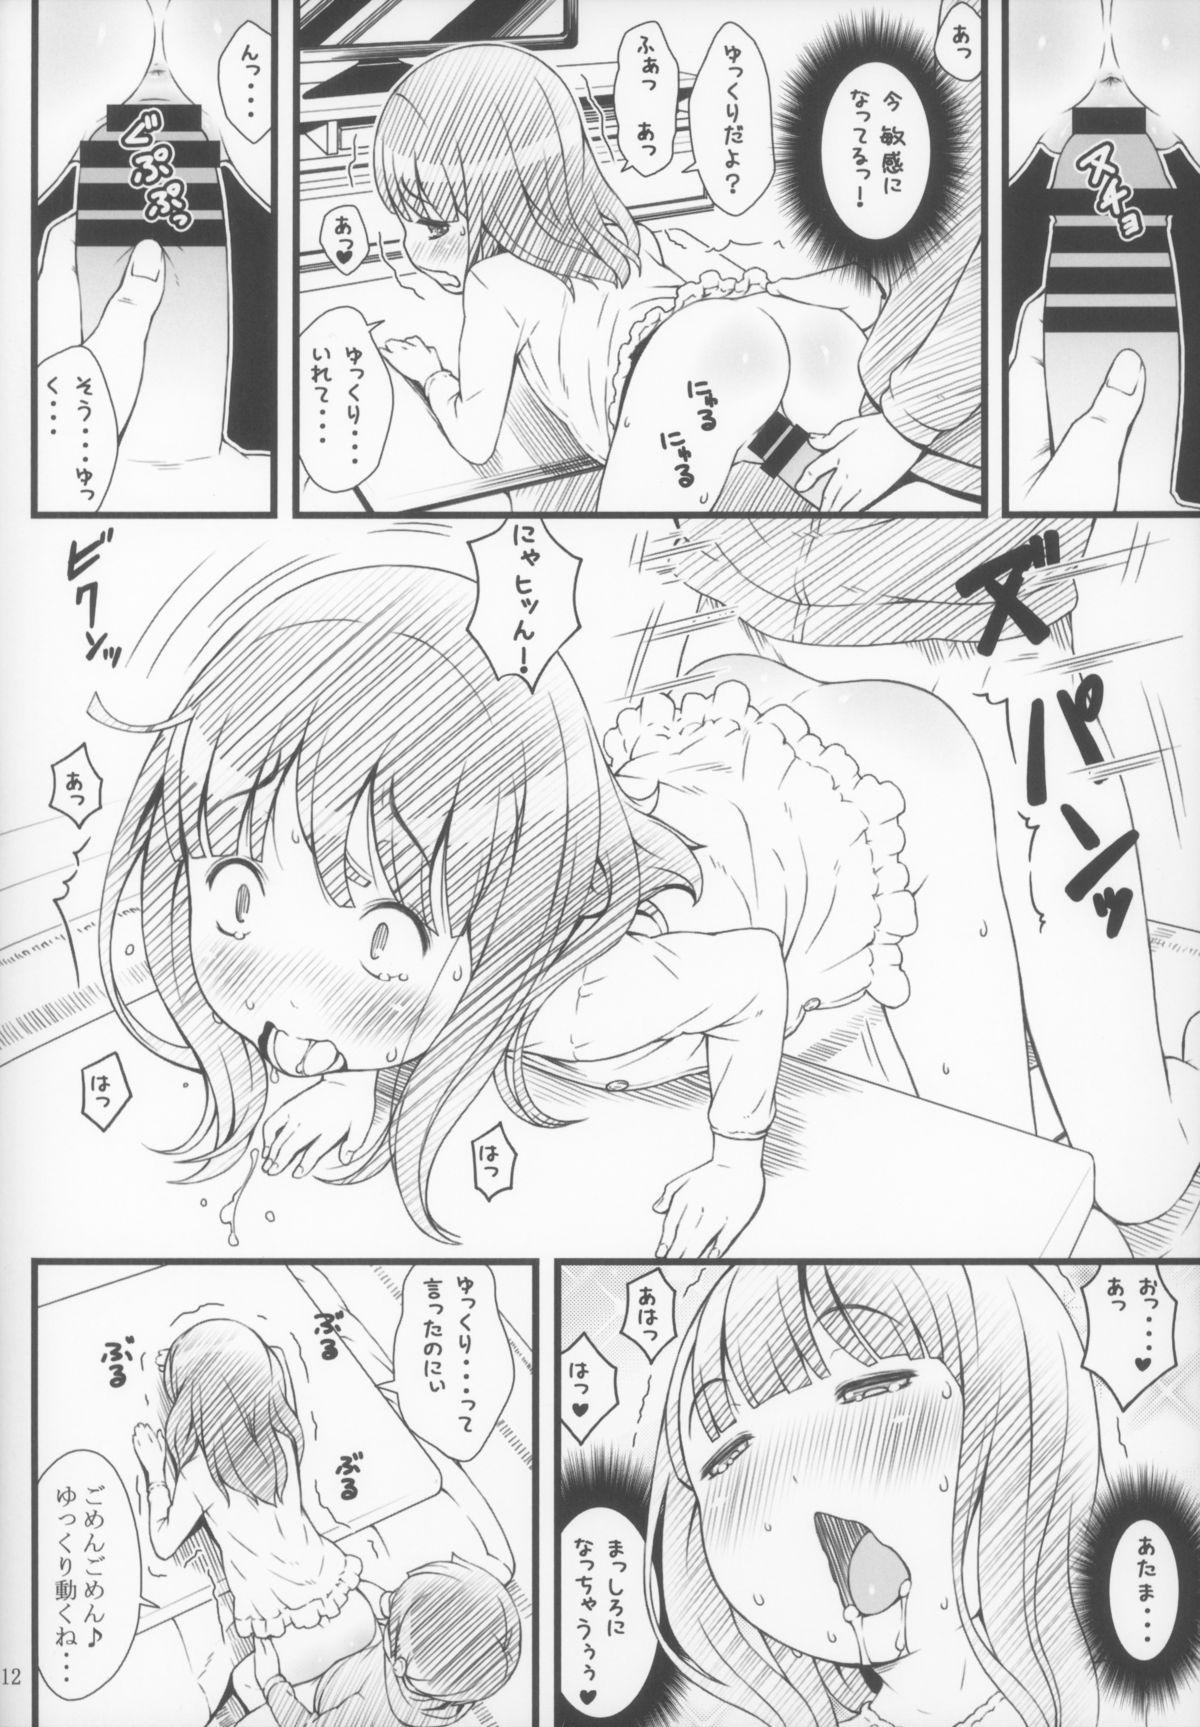 Best Blowjob Kotatsu to Anime to Onii-chan Long - Page 12